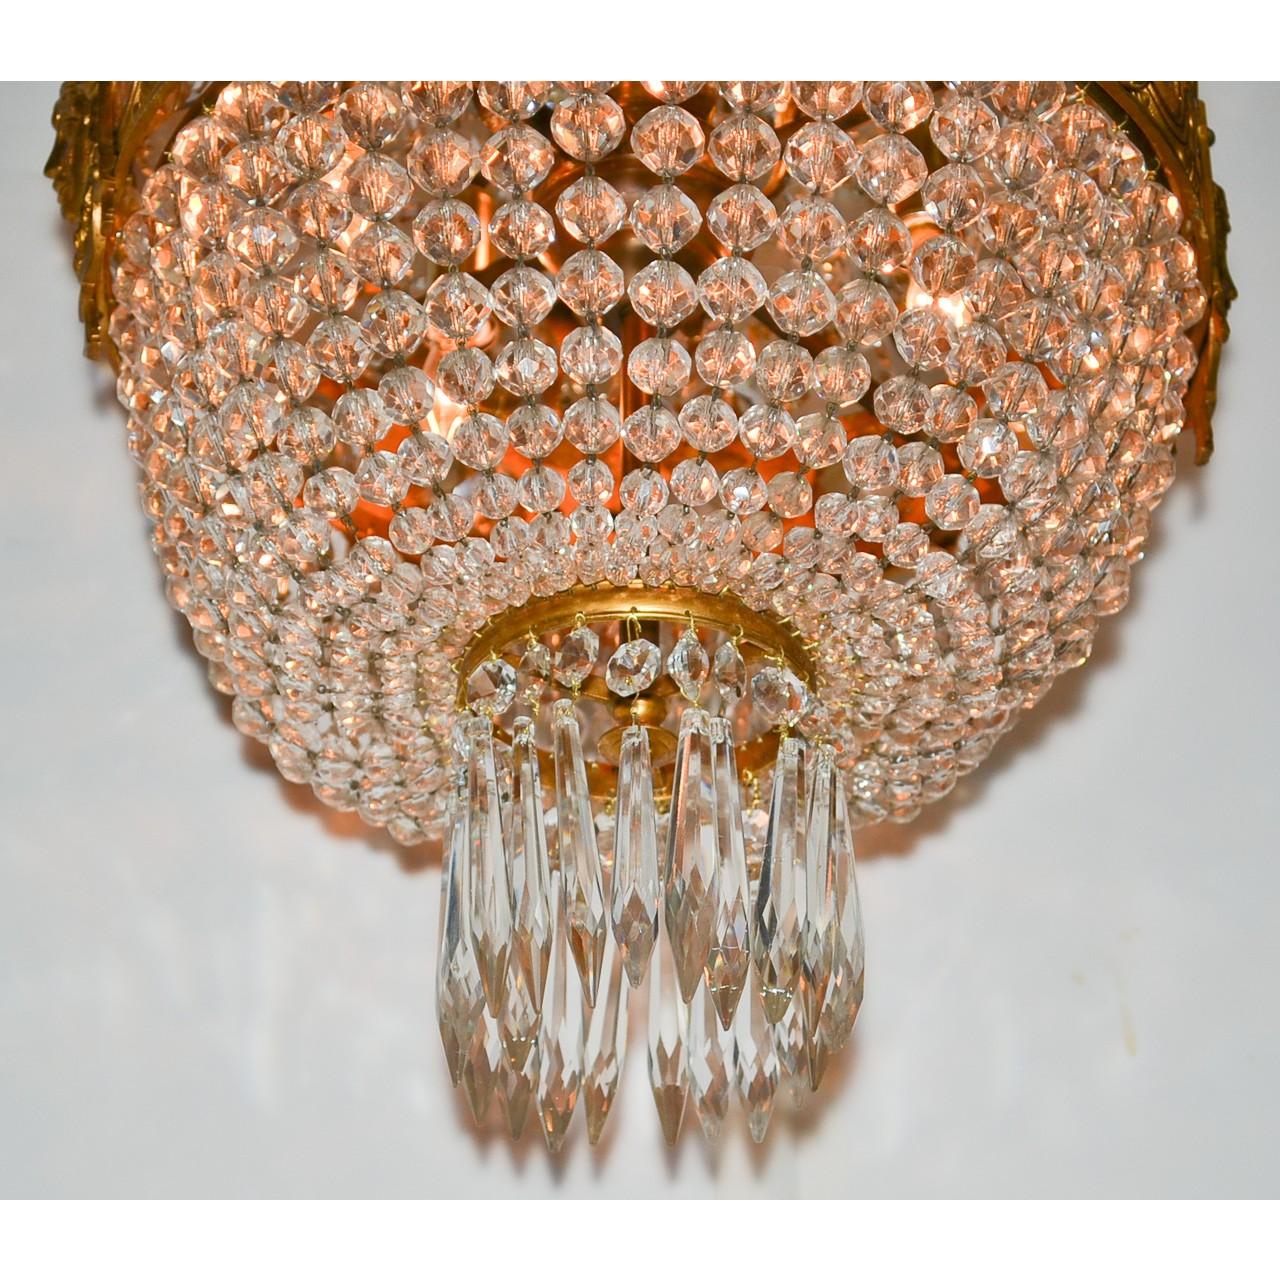 Beautiful tall and slender 19th century French basket form chandelier. The gilt bronze acanthus leaf canopy elegantly draped with multiple strands of faceted bead crystals atop a central gold gilded bronze band with highly detailed caryatid masques